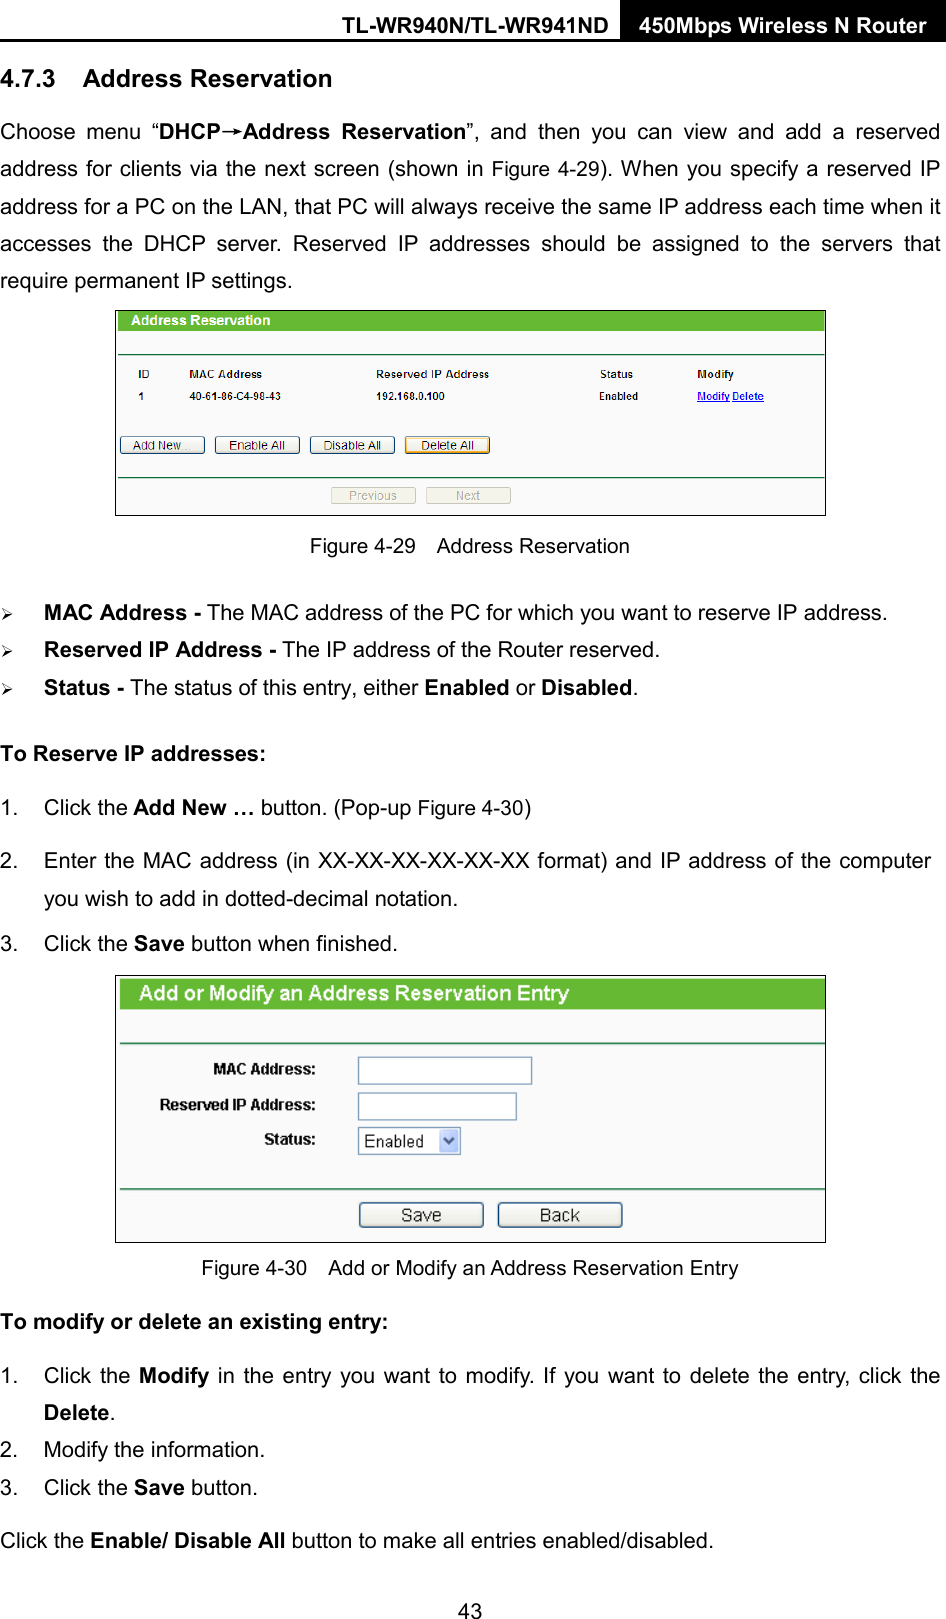 TL-WR940N/TL-WR941ND 450Mbps Wireless N Router  4.7.3 Address Reservation Choose menu “DHCP→Address Reservation”,  and then you can view and add a reserved address for clients via the next screen (shown in Figure 4-29). When you specify a reserved IP address for a PC on the LAN, that PC will always receive the same IP address each time when it accesses the DHCP server. Reserved IP addresses should be assigned to the  servers  that require permanent IP settings.    Figure 4-29  Address Reservation  MAC Address - The MAC address of the PC for which you want to reserve IP address.  Reserved IP Address - The IP address of the Router reserved.  Status - The status of this entry, either Enabled or Disabled. To Reserve IP addresses:   1. Click the Add New … button. (Pop-up Figure 4-30) 2. Enter the MAC address (in XX-XX-XX-XX-XX-XX format) and IP address of the computer you wish to add in dotted-decimal notation.   3. Click the Save button when finished.    Figure 4-30  Add or Modify an Address Reservation Entry To modify or delete an existing entry: 1. Click the Modify  in the entry you want to modify. If you want to delete the entry, click the Delete. 2. Modify the information.   3. Click the Save button. Click the Enable/ Disable All button to make all entries enabled/disabled. 43 